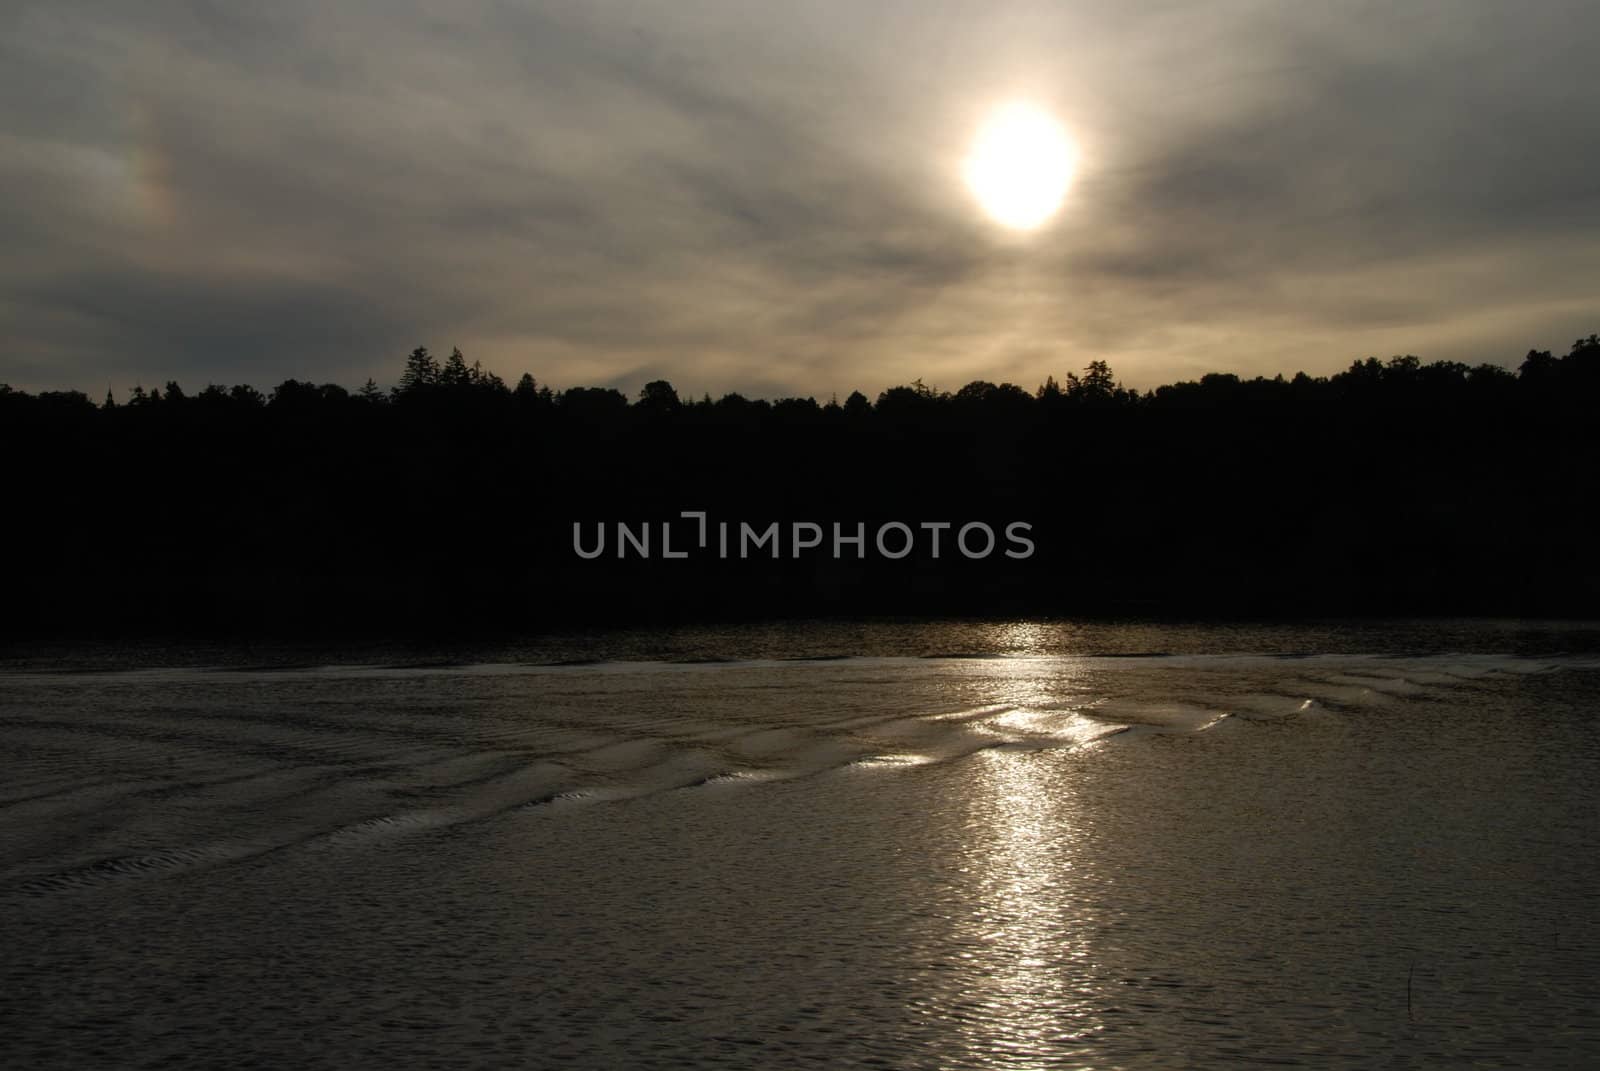                     Sun is setting behind forest and is mirroring in the lake